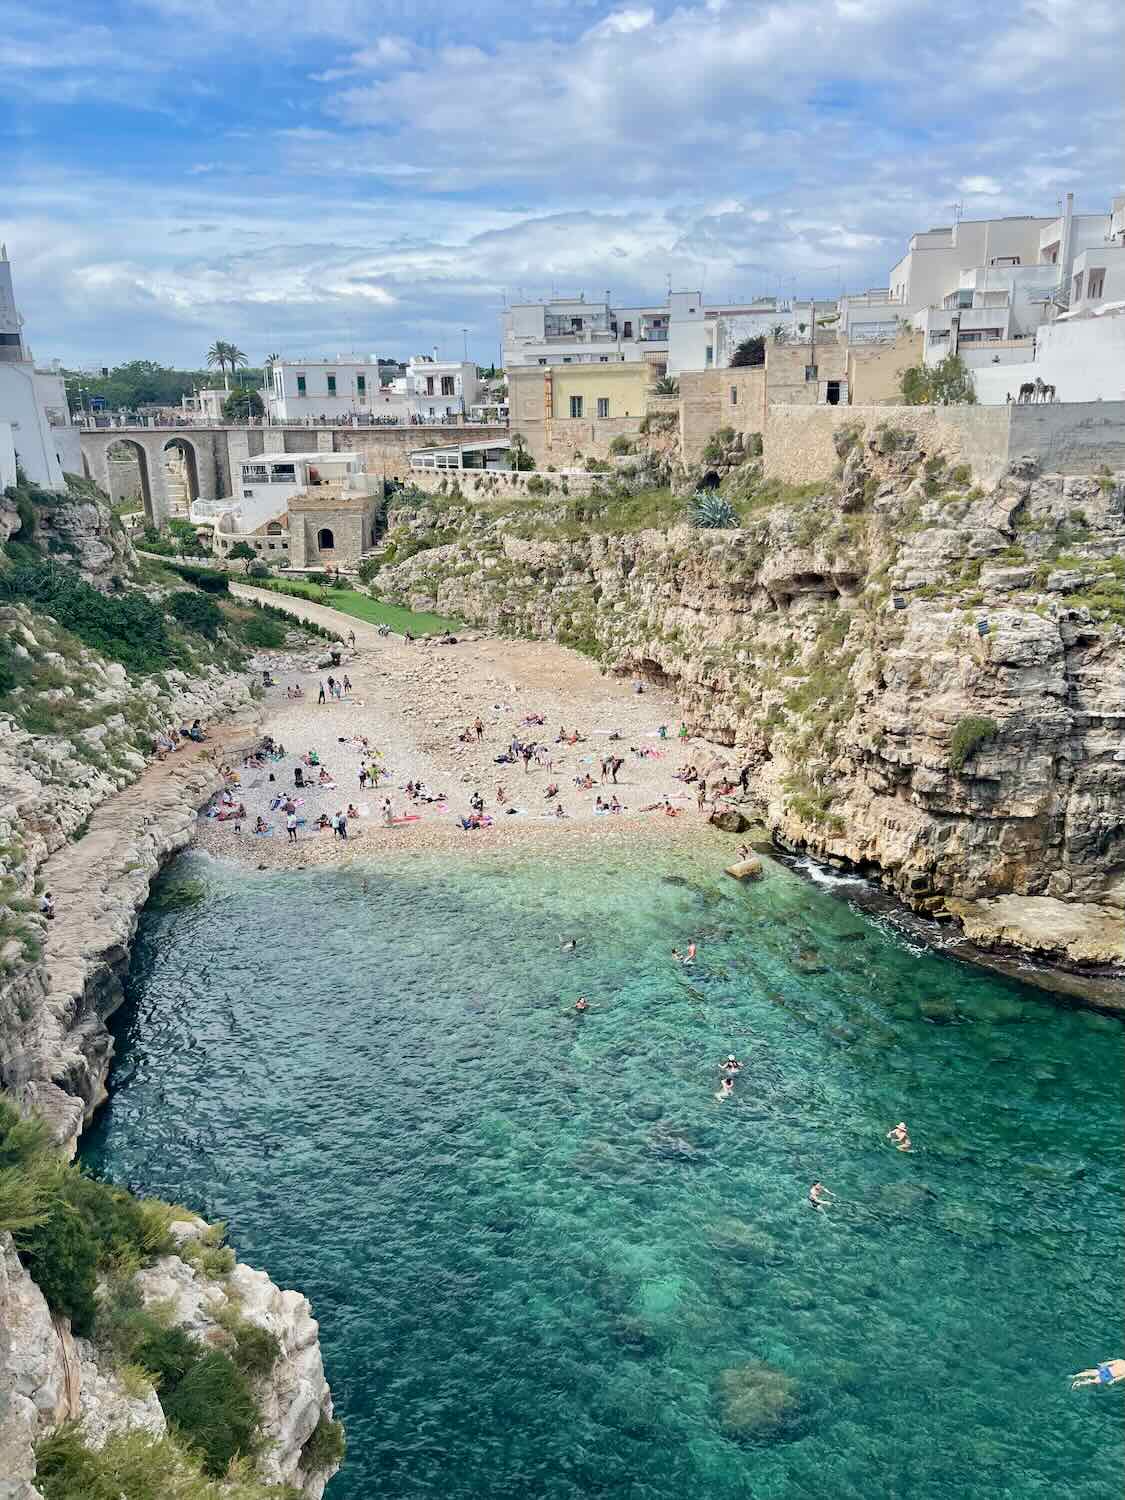 A view of the beach at Polignano a Mare, Italy, with turquoise water and rocky cliffs surrounding the cove. People are sunbathing on the pebble beach and swimming in the clear water. The town with its white buildings is visible in the background.